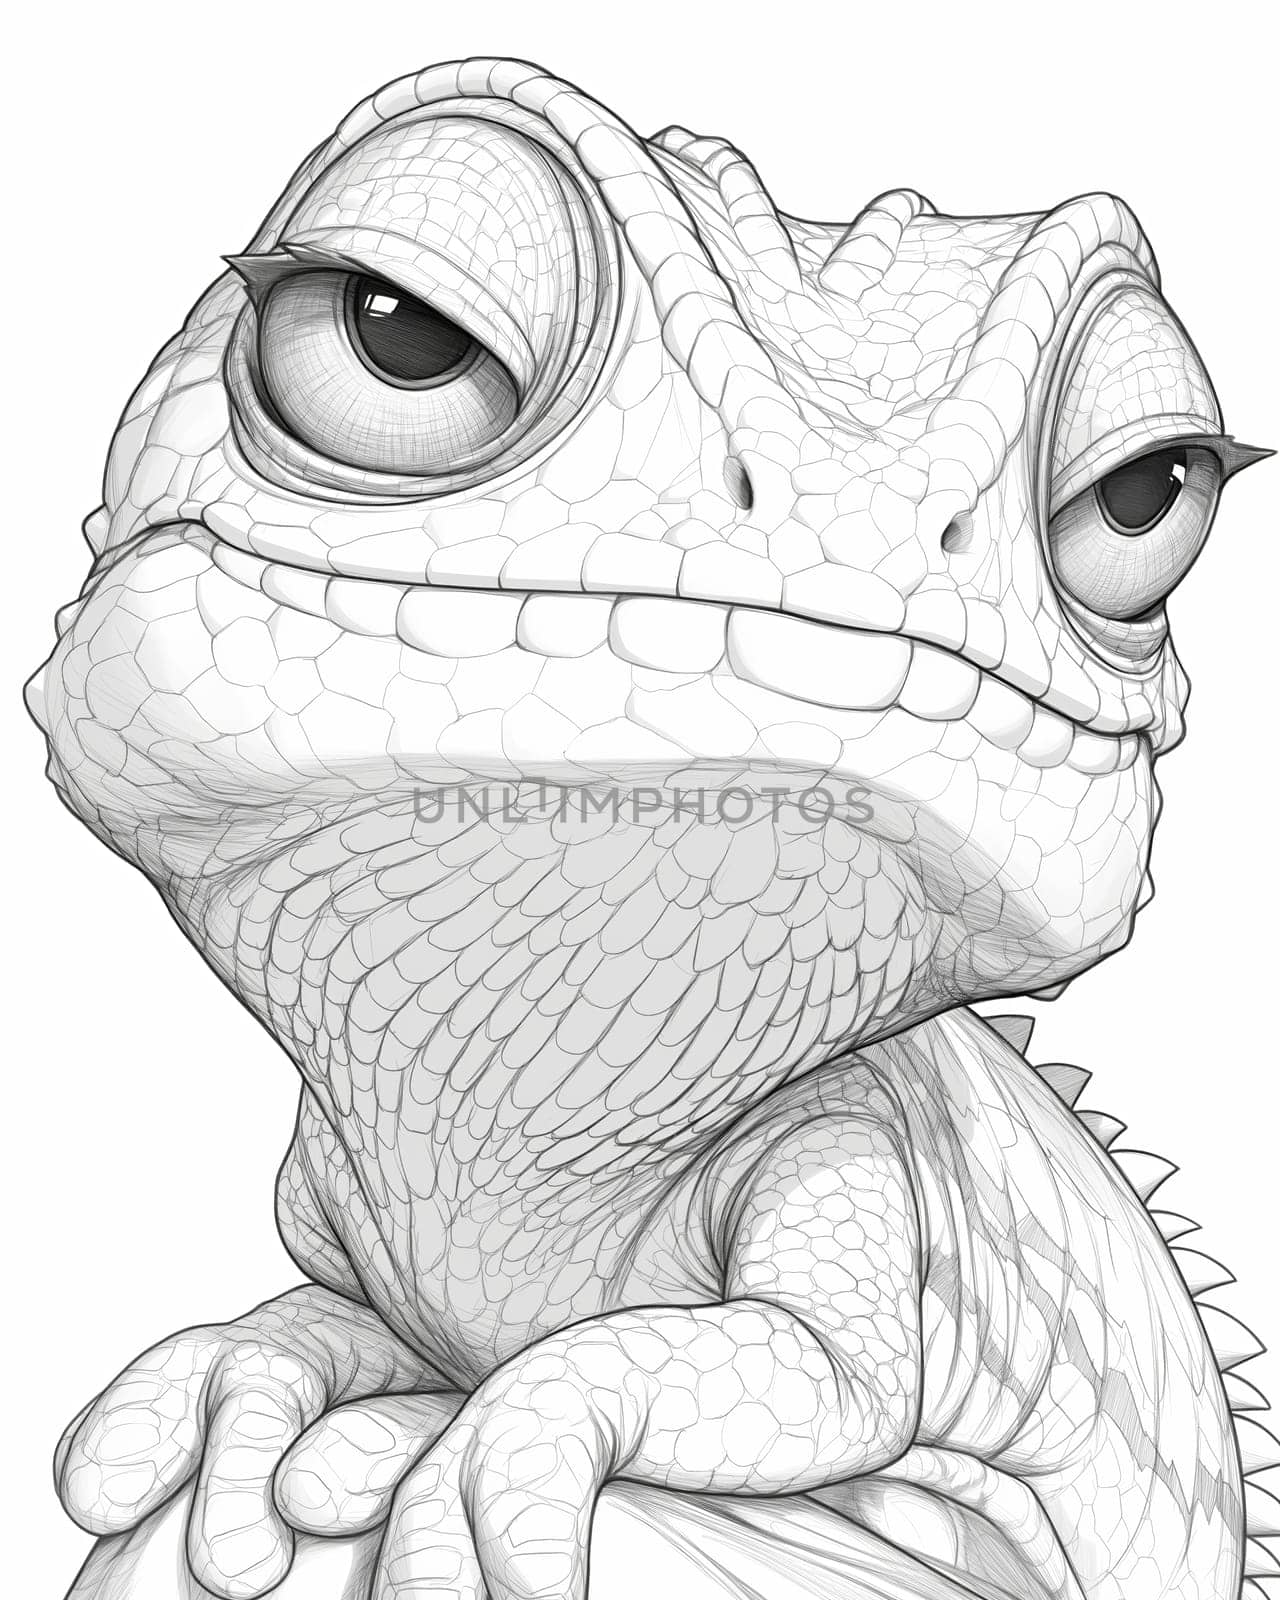 Coloring book for children, coloring animal, chameleon. by Fischeron